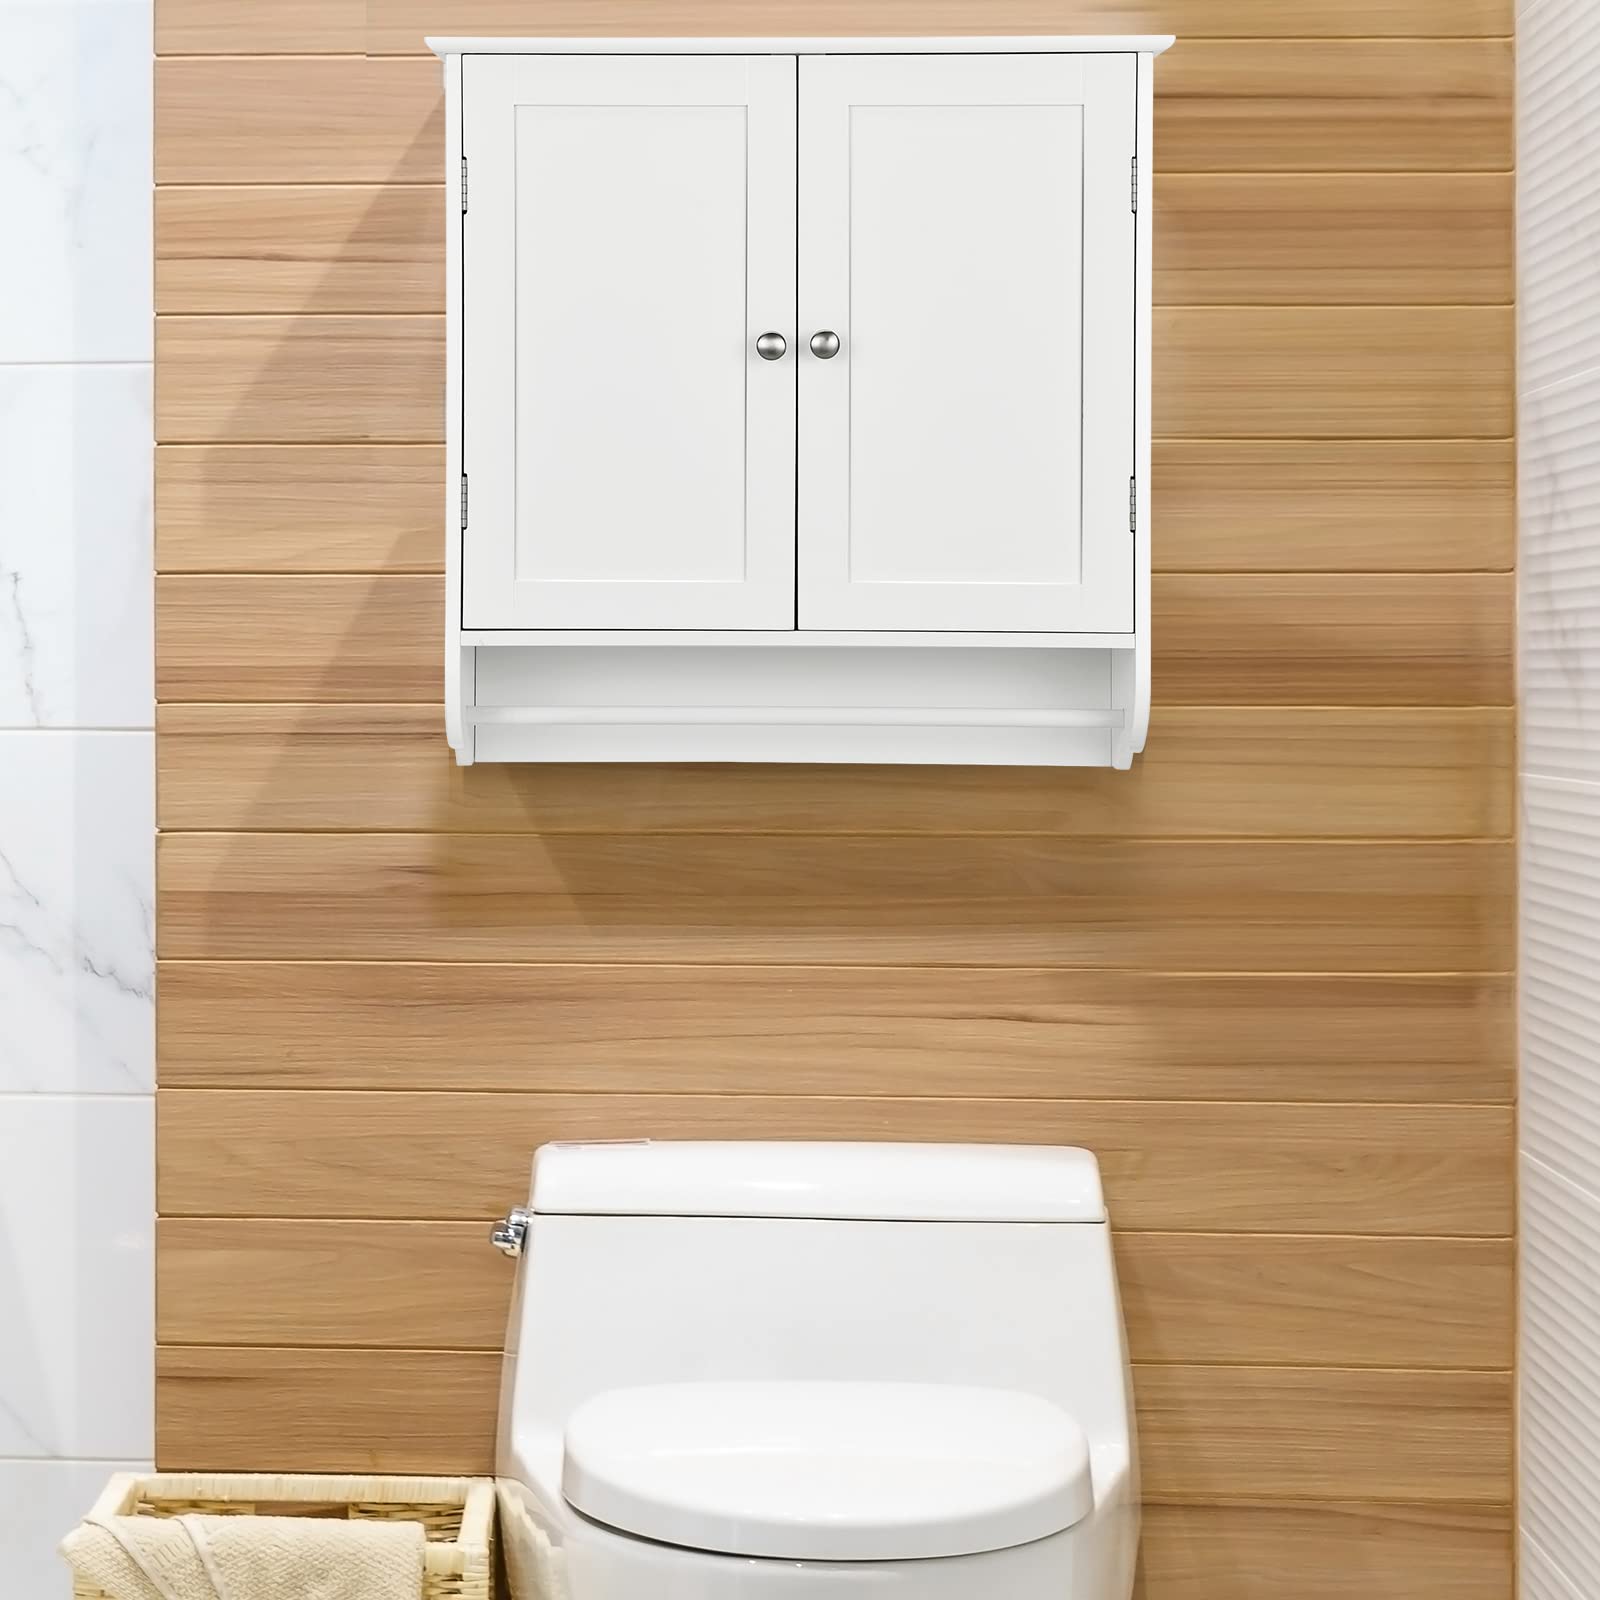 Giantex Bathroom Cabinet Wall Mounted - Over The Toilet Medicine Cabinet with Double Doors